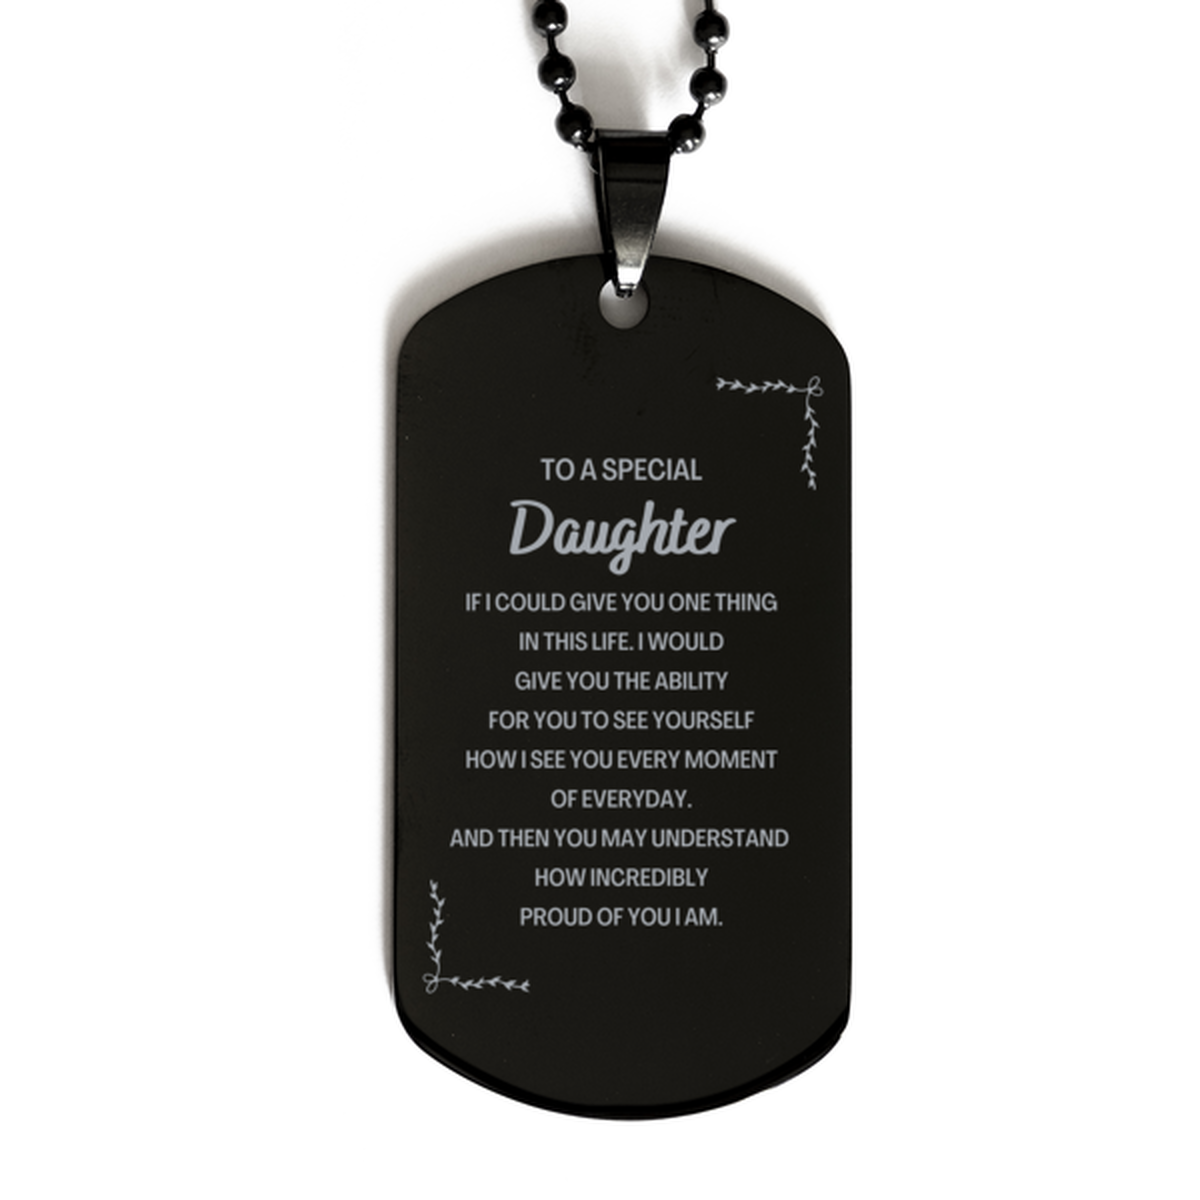 To My Daughter Black Dog Tag, Gifts For Daughter Engraved, Inspirational Gifts for Christmas Birthday, Epic Gifts for Daughter To A Special Daughter how incredibly proud of you I am